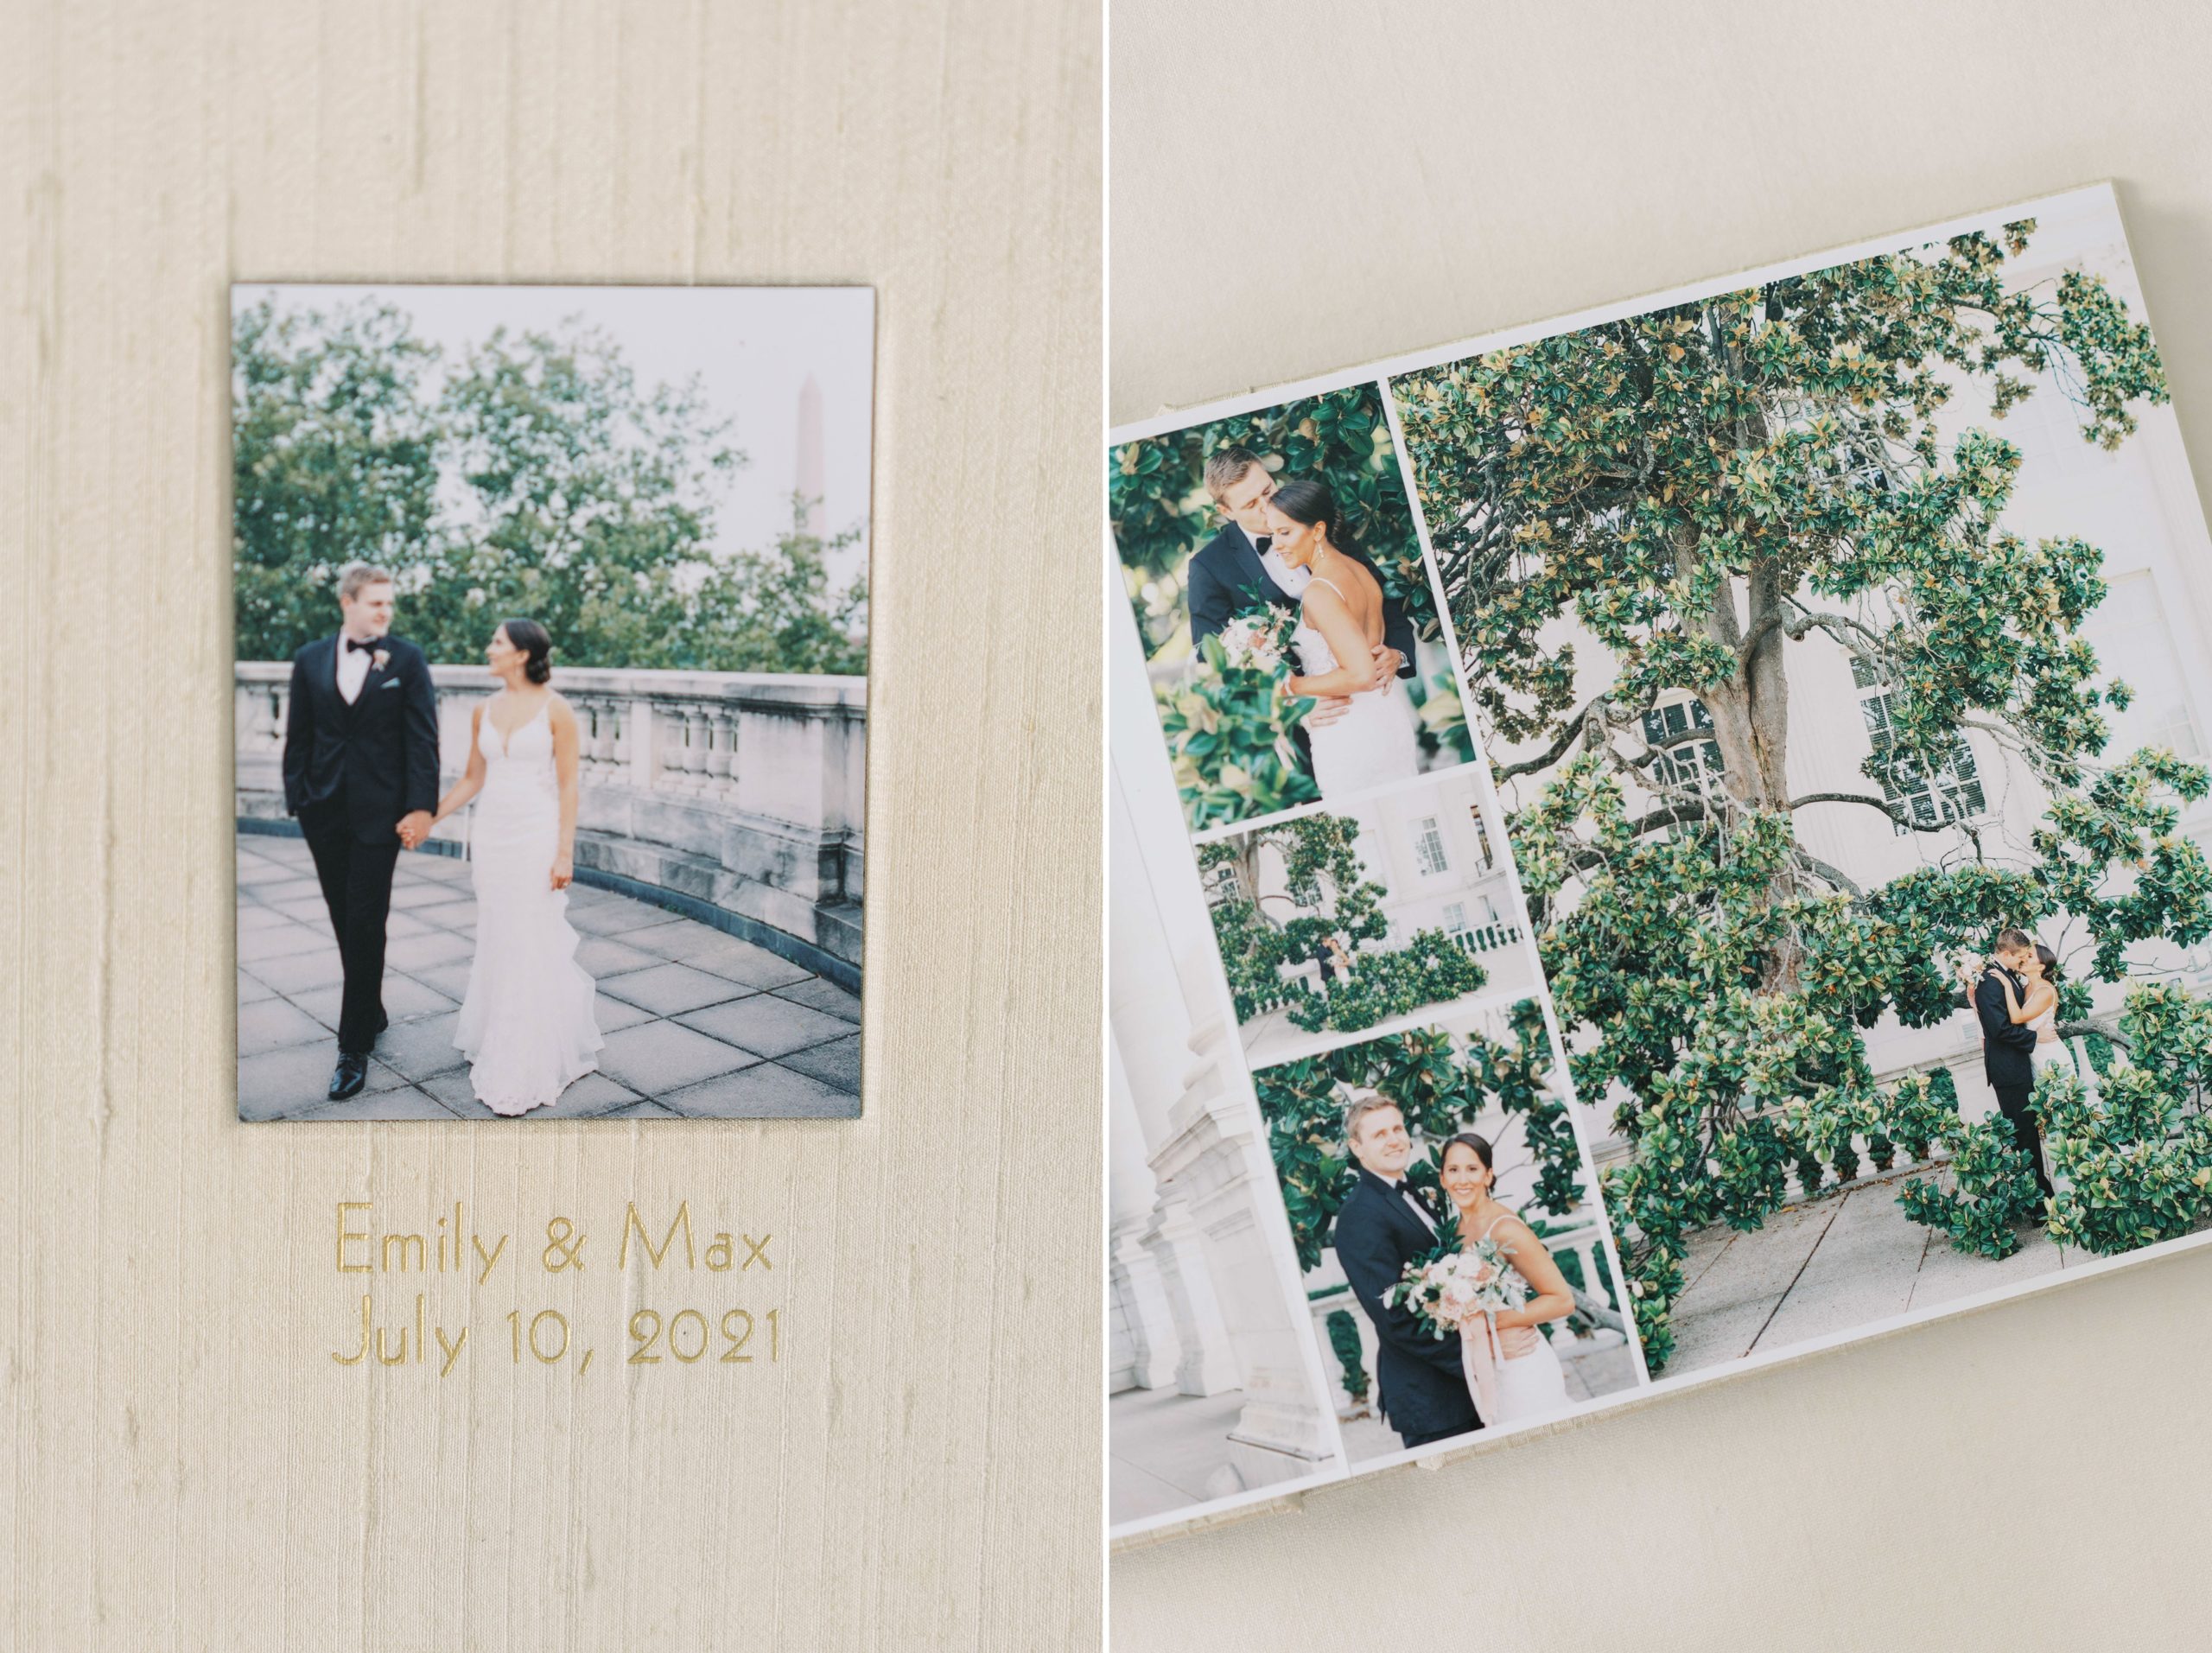 Washington, DC DAR Constitution Hall wedding album in heirloom quality silk. Photographs by Alicia Lacey Photography.